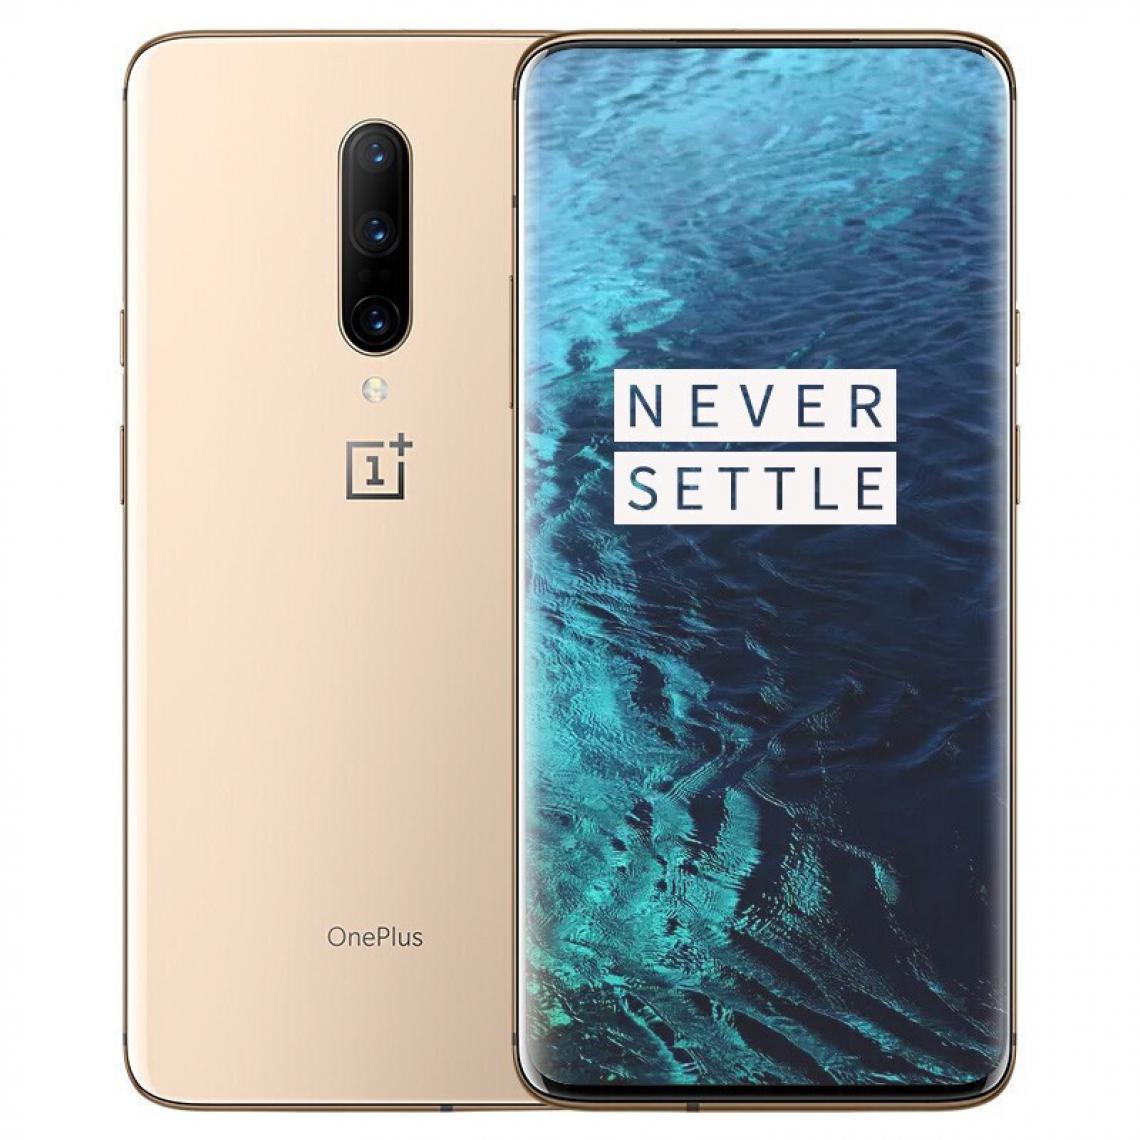 Oneplus - OnePlus 7 Pro - Smartphone Android